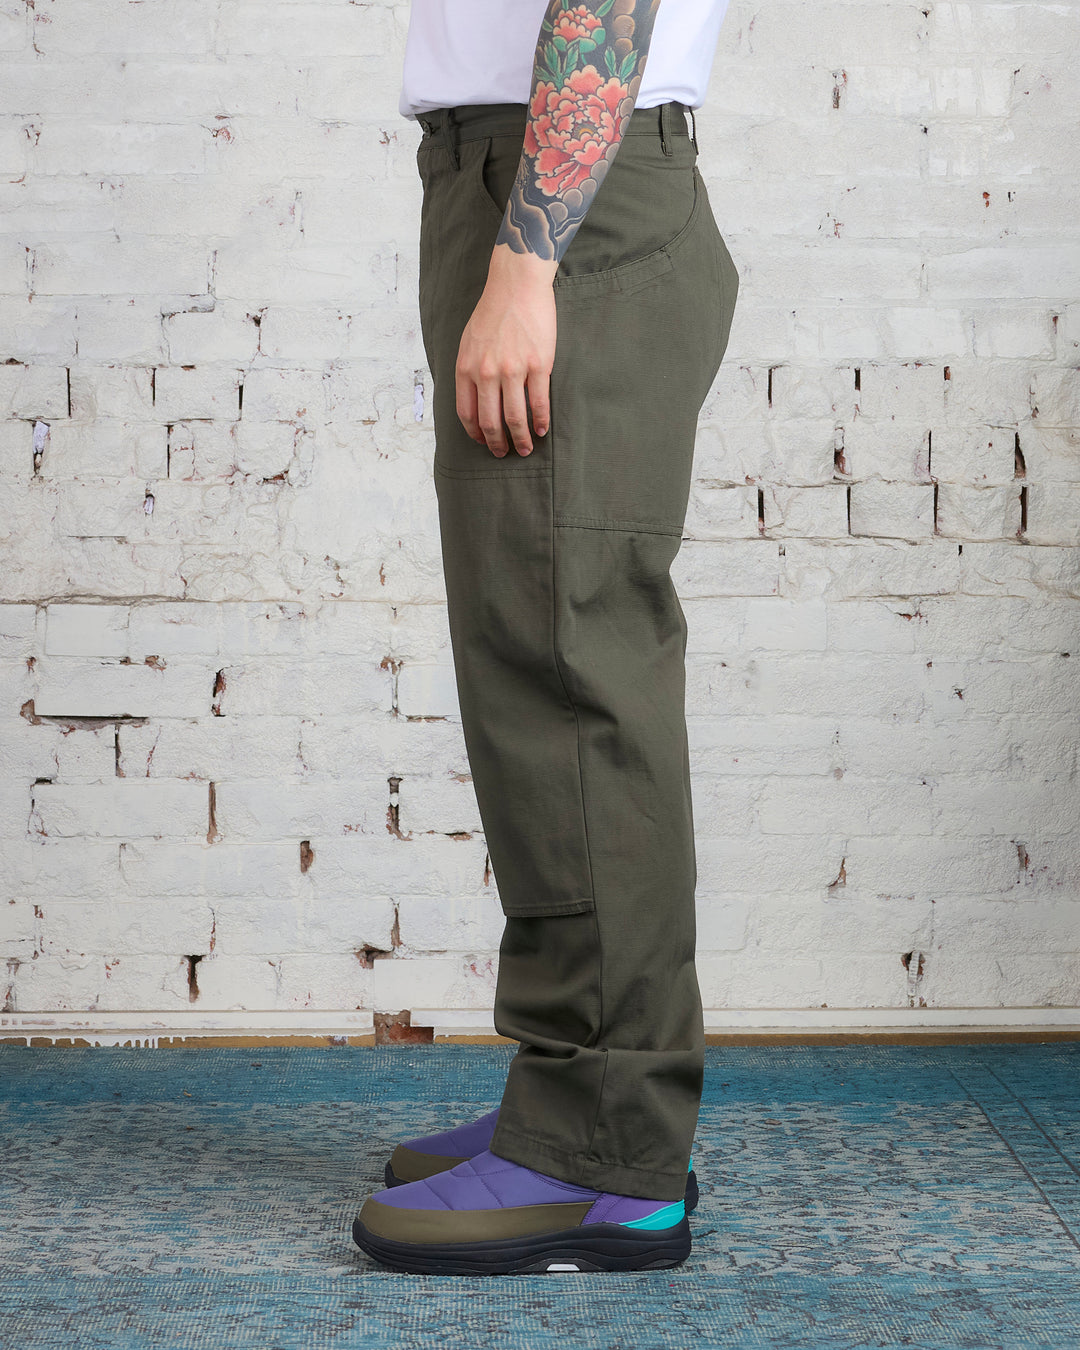 Engineered Garments Climbing Pant Olive Heavy Cotton Ripstop – LESS 17